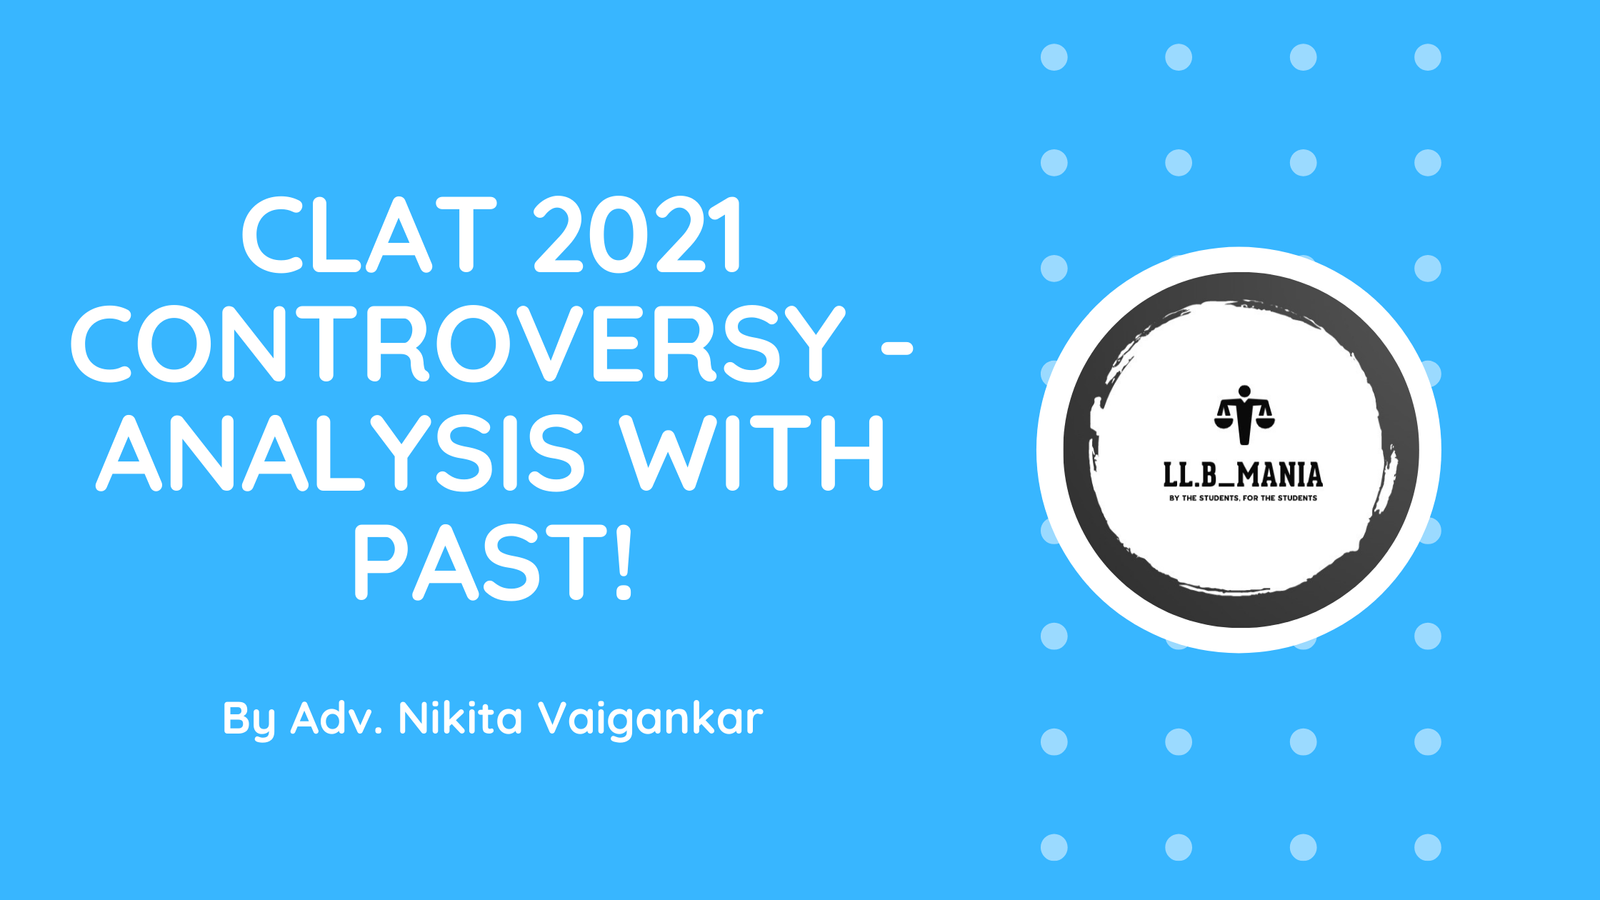 CLAT 2021 Controversy – Analysis with Past!